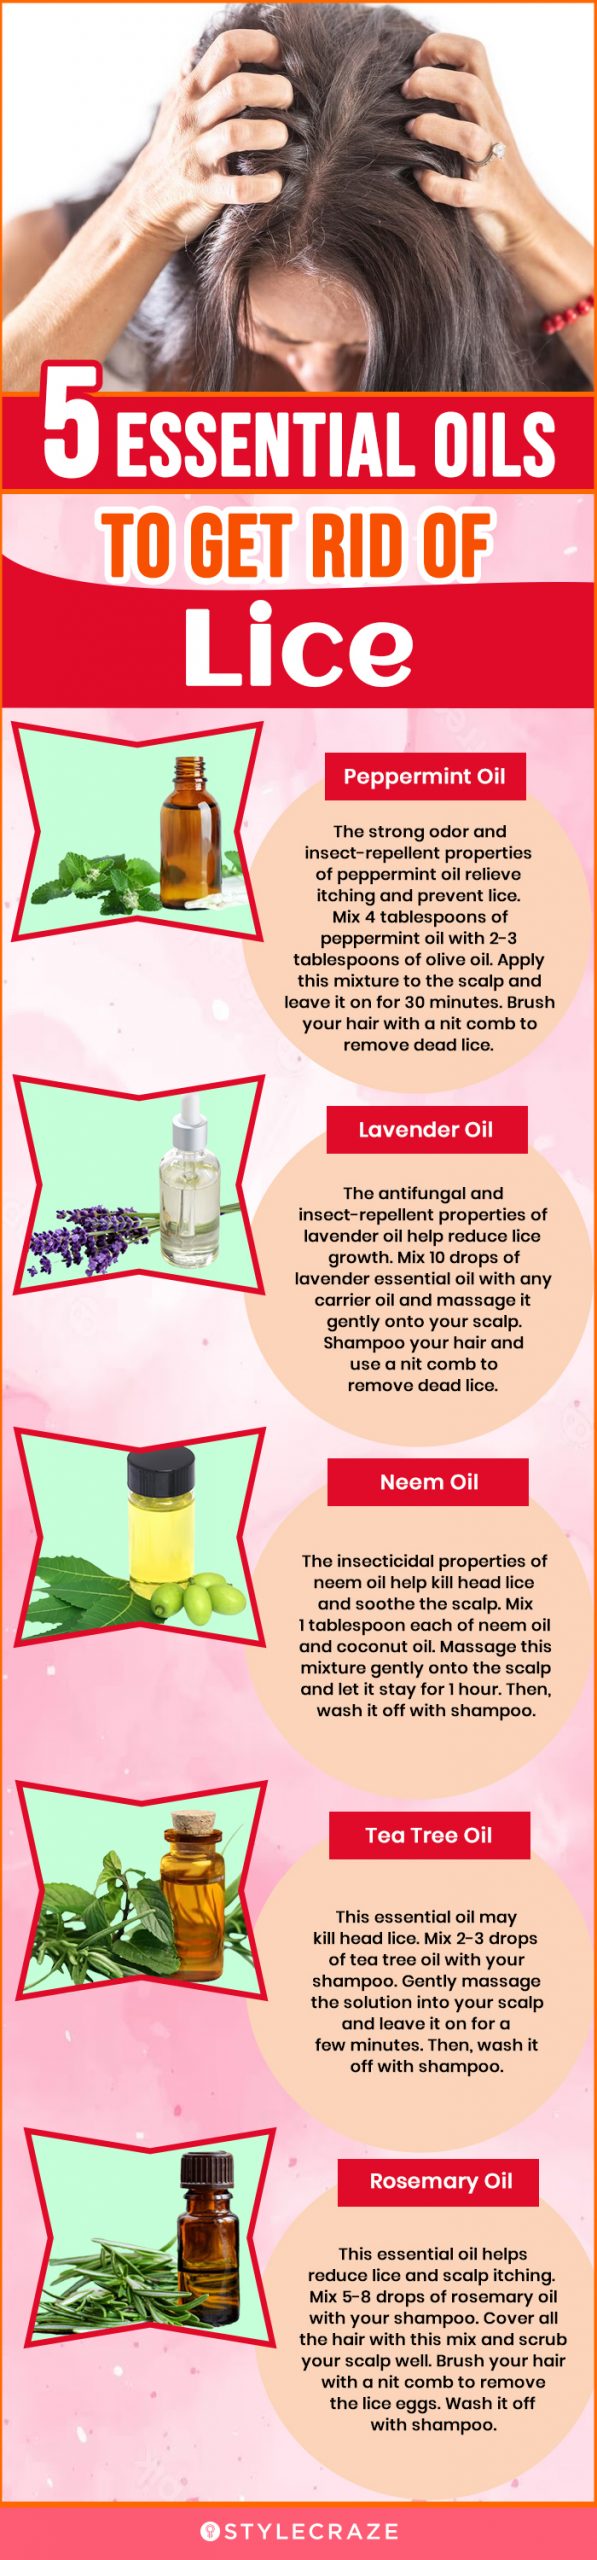 5 essential oils to help prevent lice (infographic)